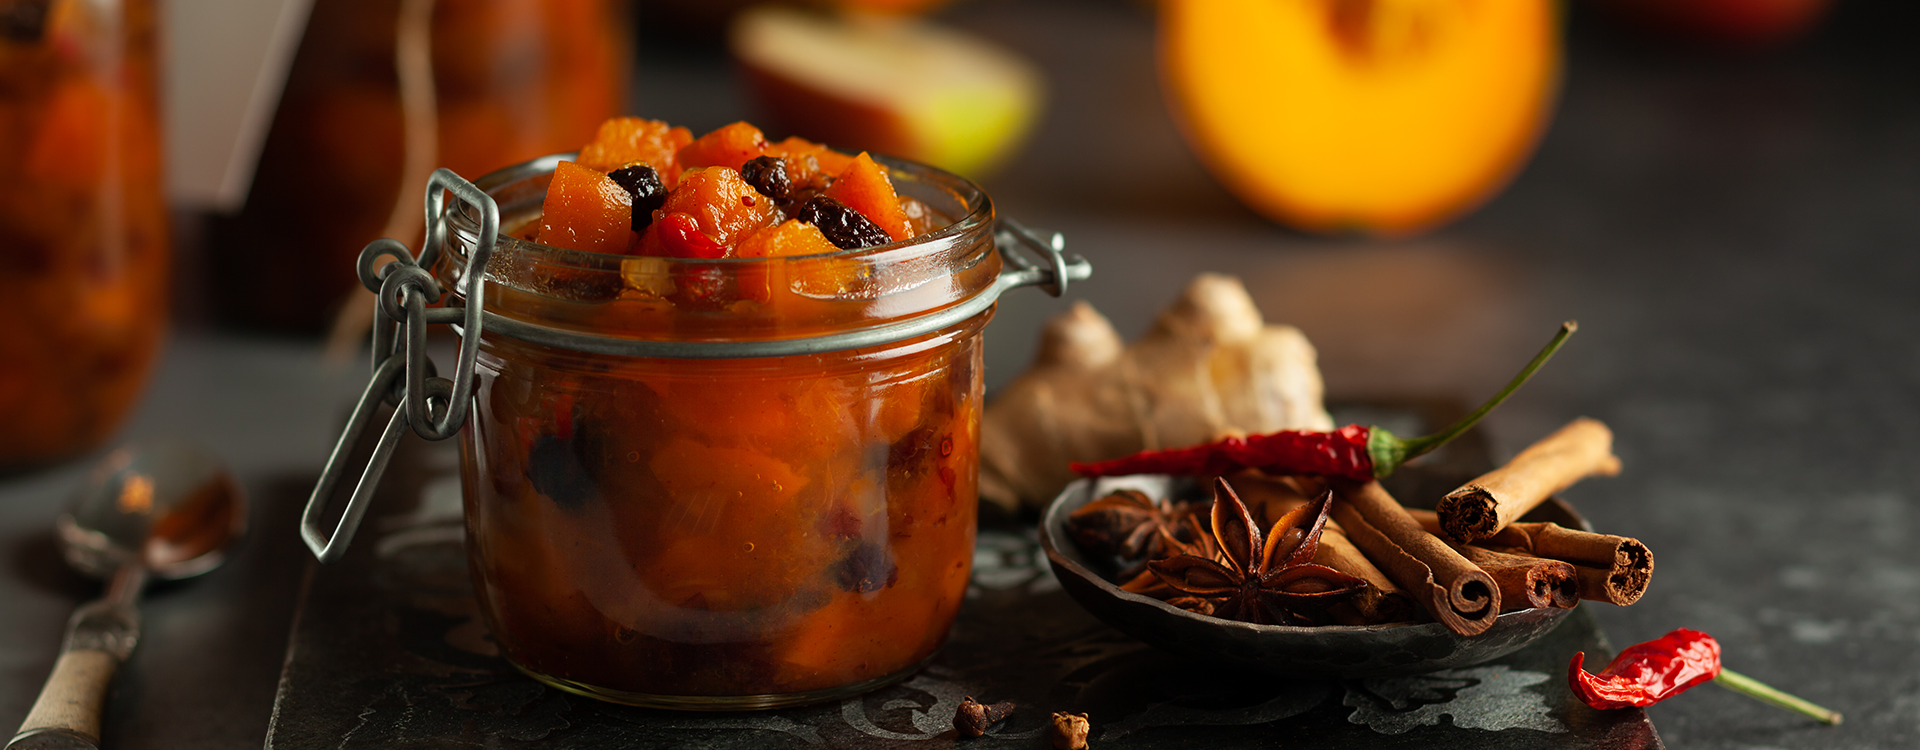 Apple pumpkin chutney recipe to replace cranberry sauce for Thanksgiving to prevent heartburn 